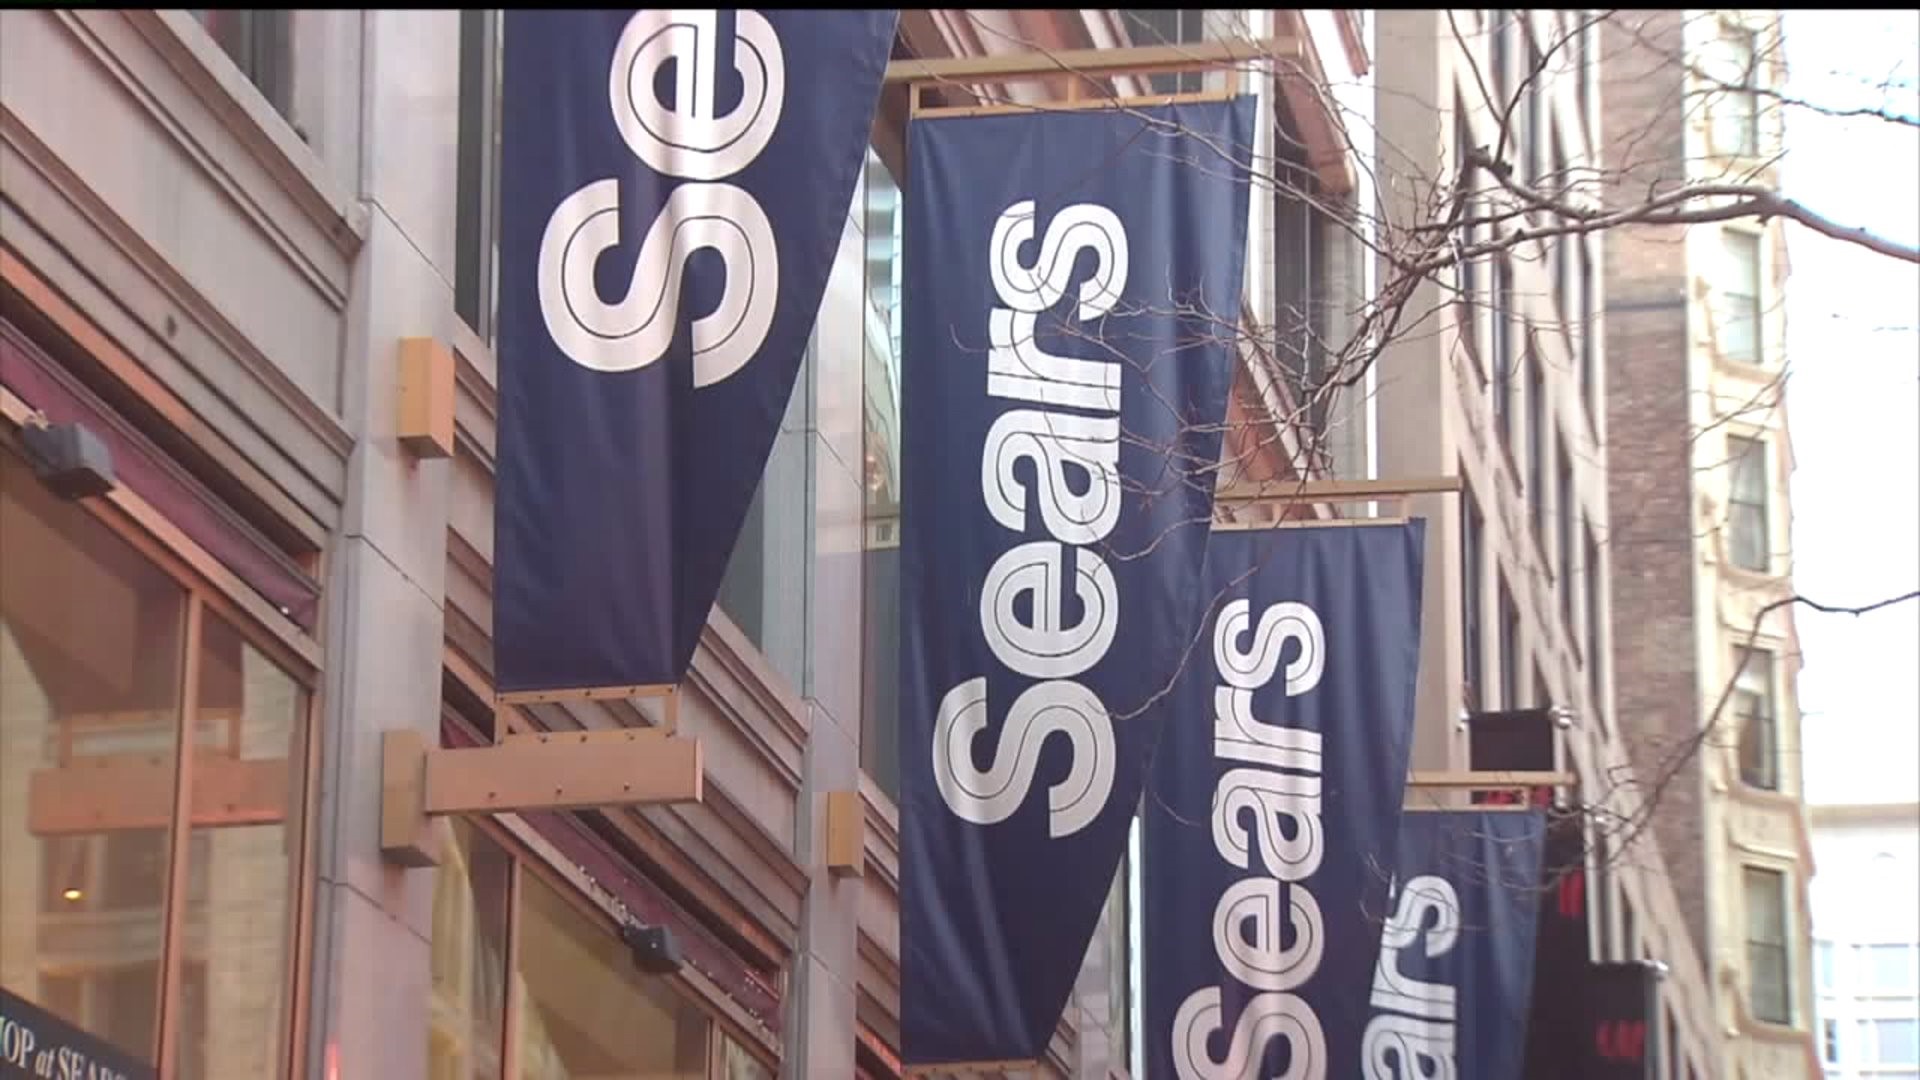 Sears is saved from bankruptcy